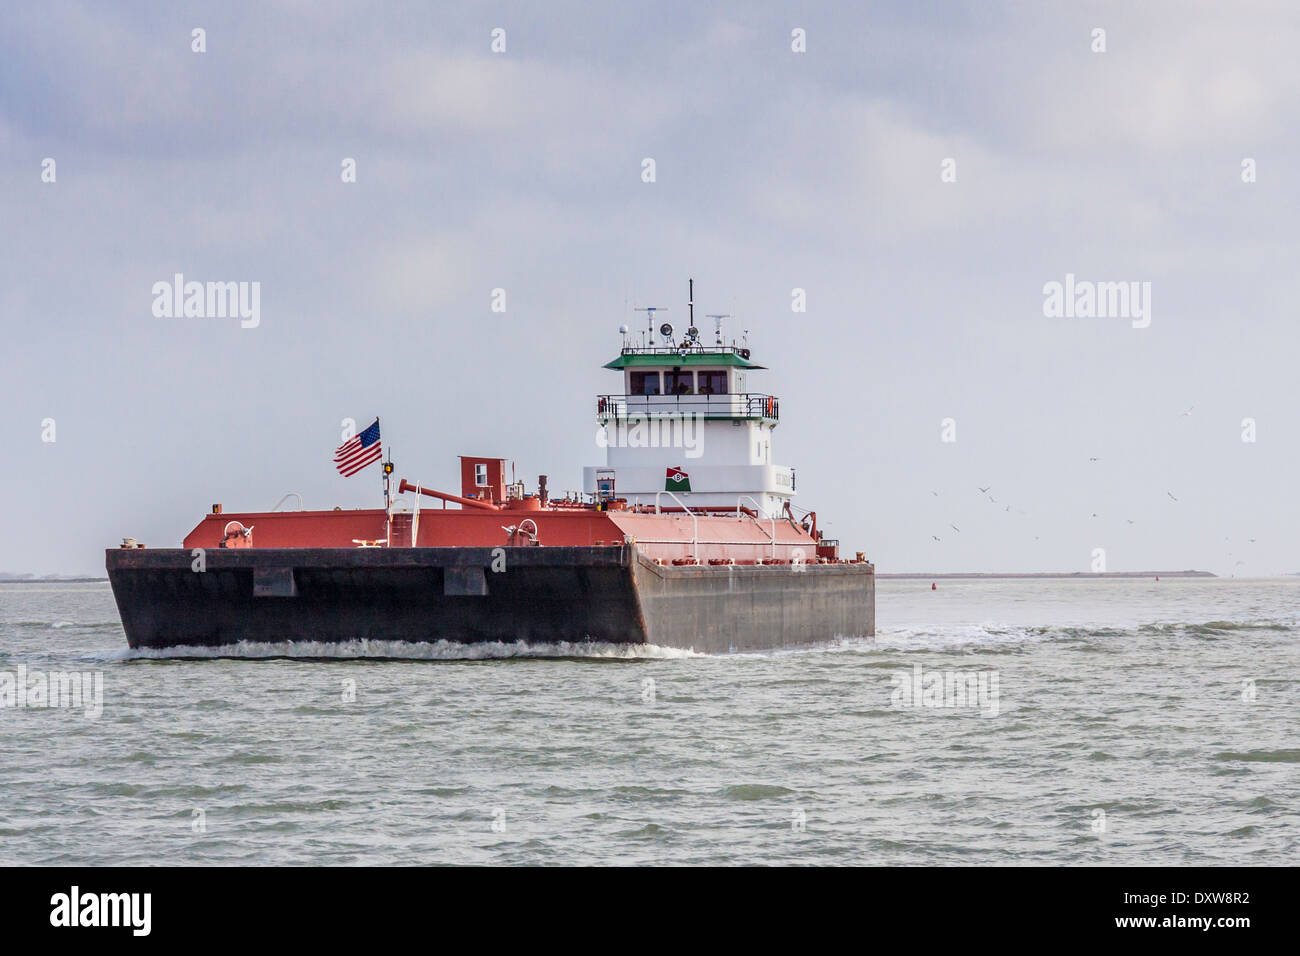 Tugboat and Barge in coastal waterway near Aransas Park National Wildlife Refuge in Southern Texas. Stock Photo